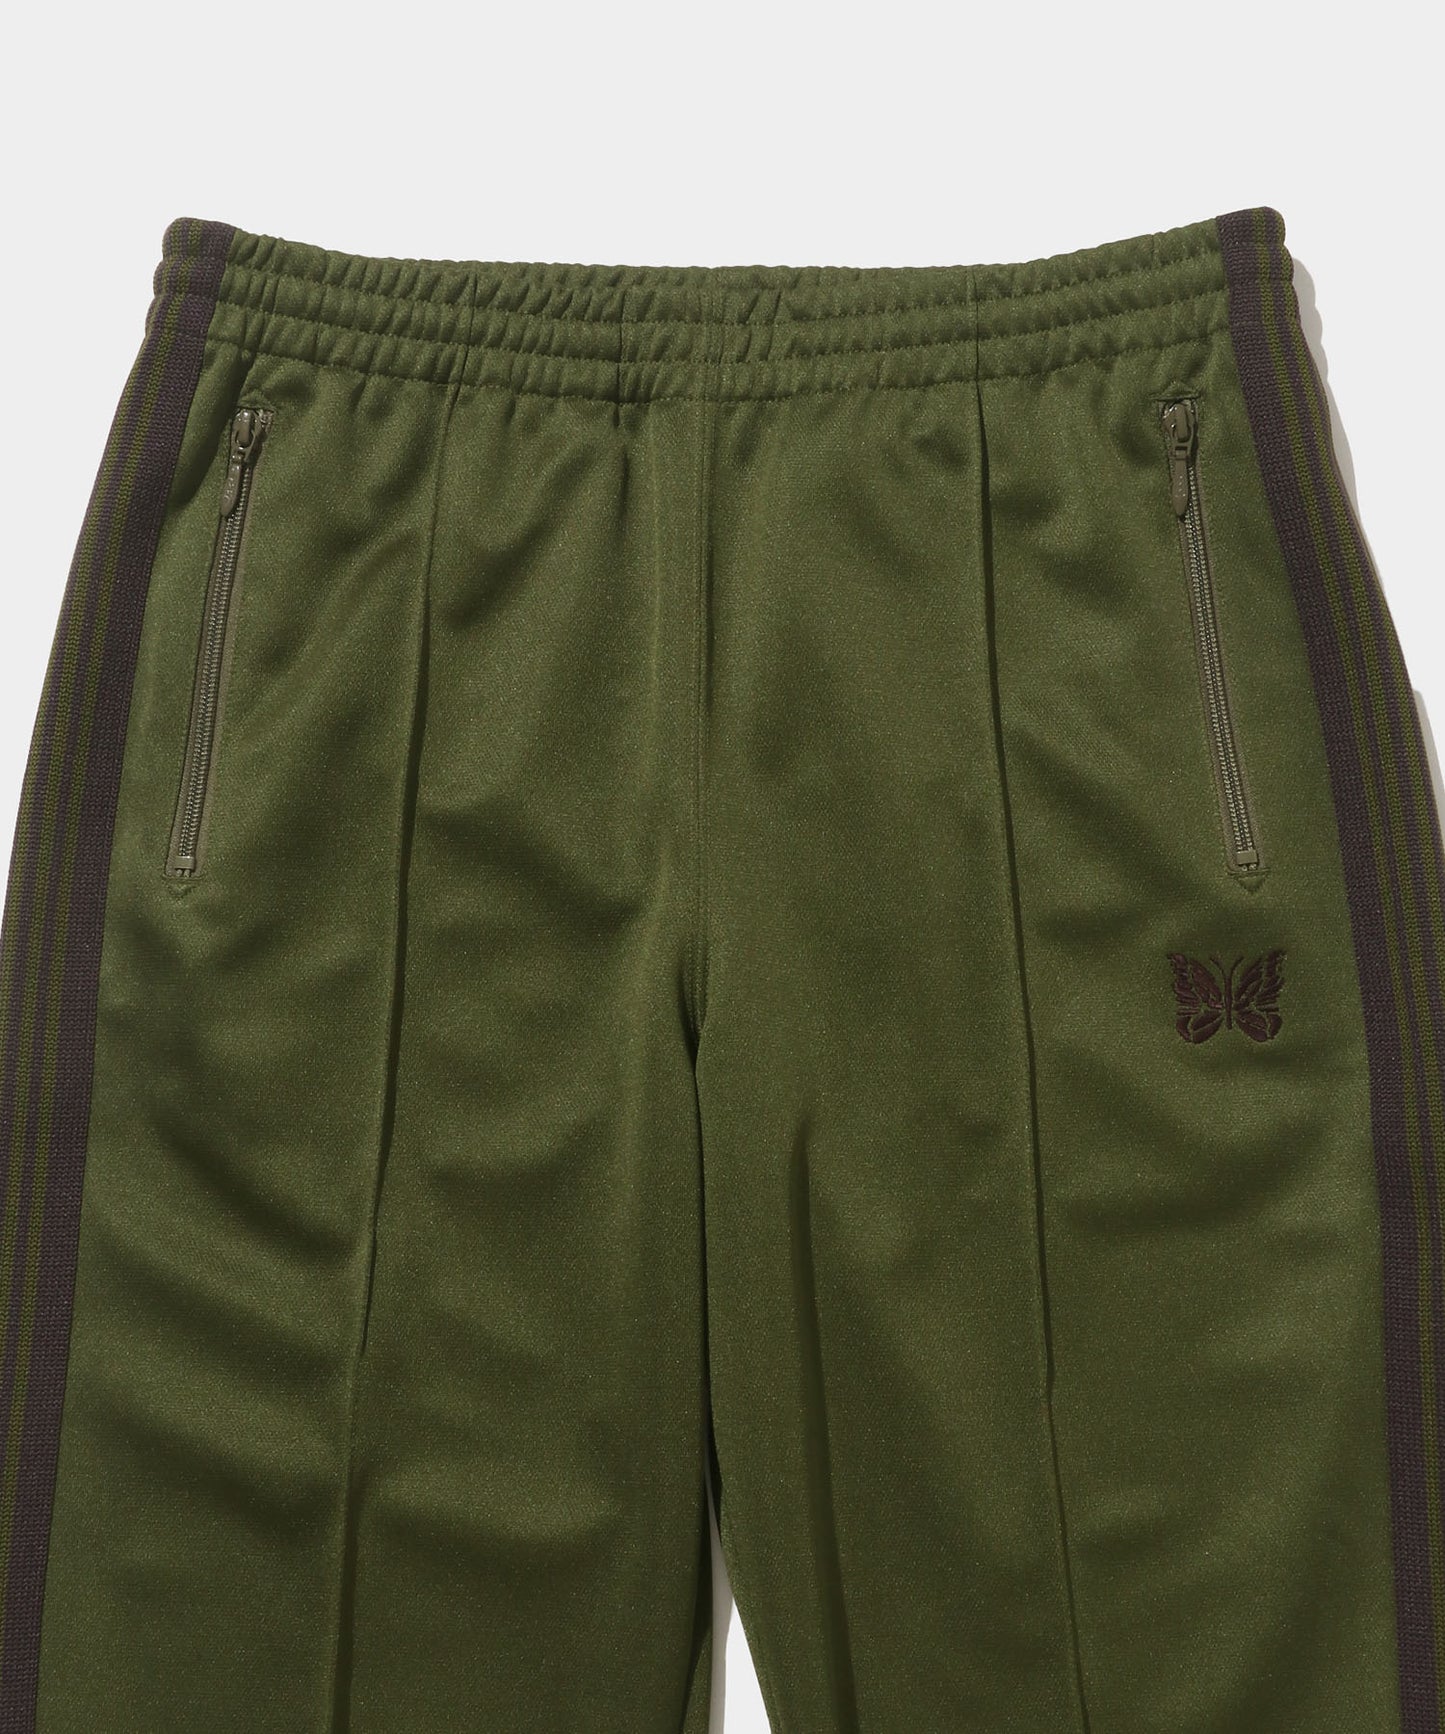 NEEDLES Zipped Track Pant - Poly Smooth Olive